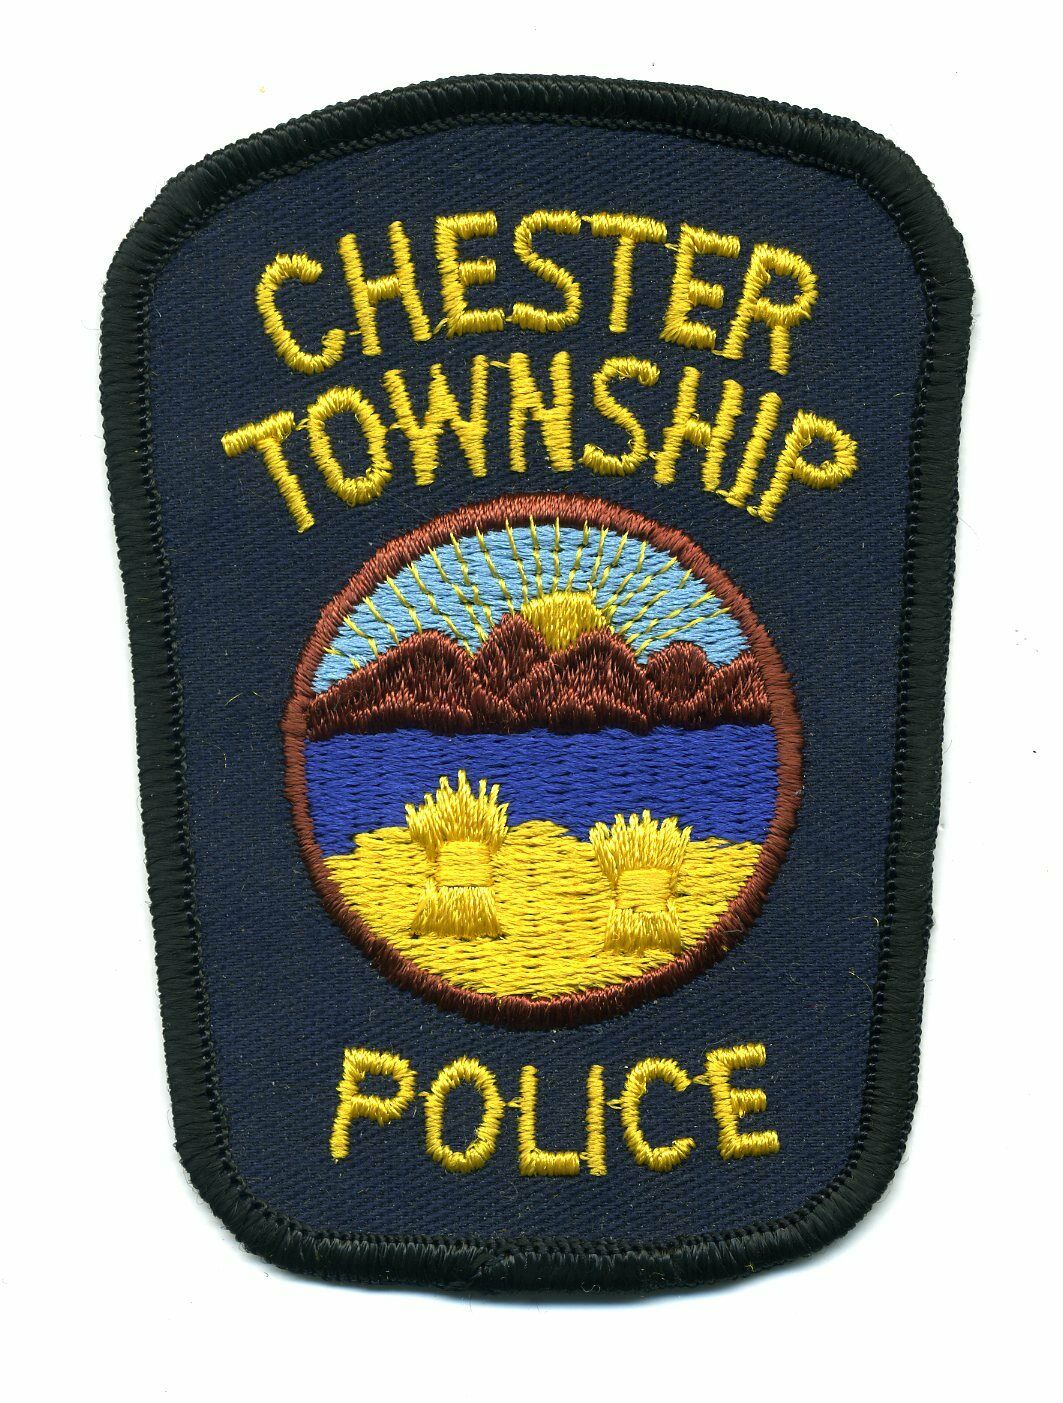 Chester Township Ohio Police Patch - Oh Sheriff Twp